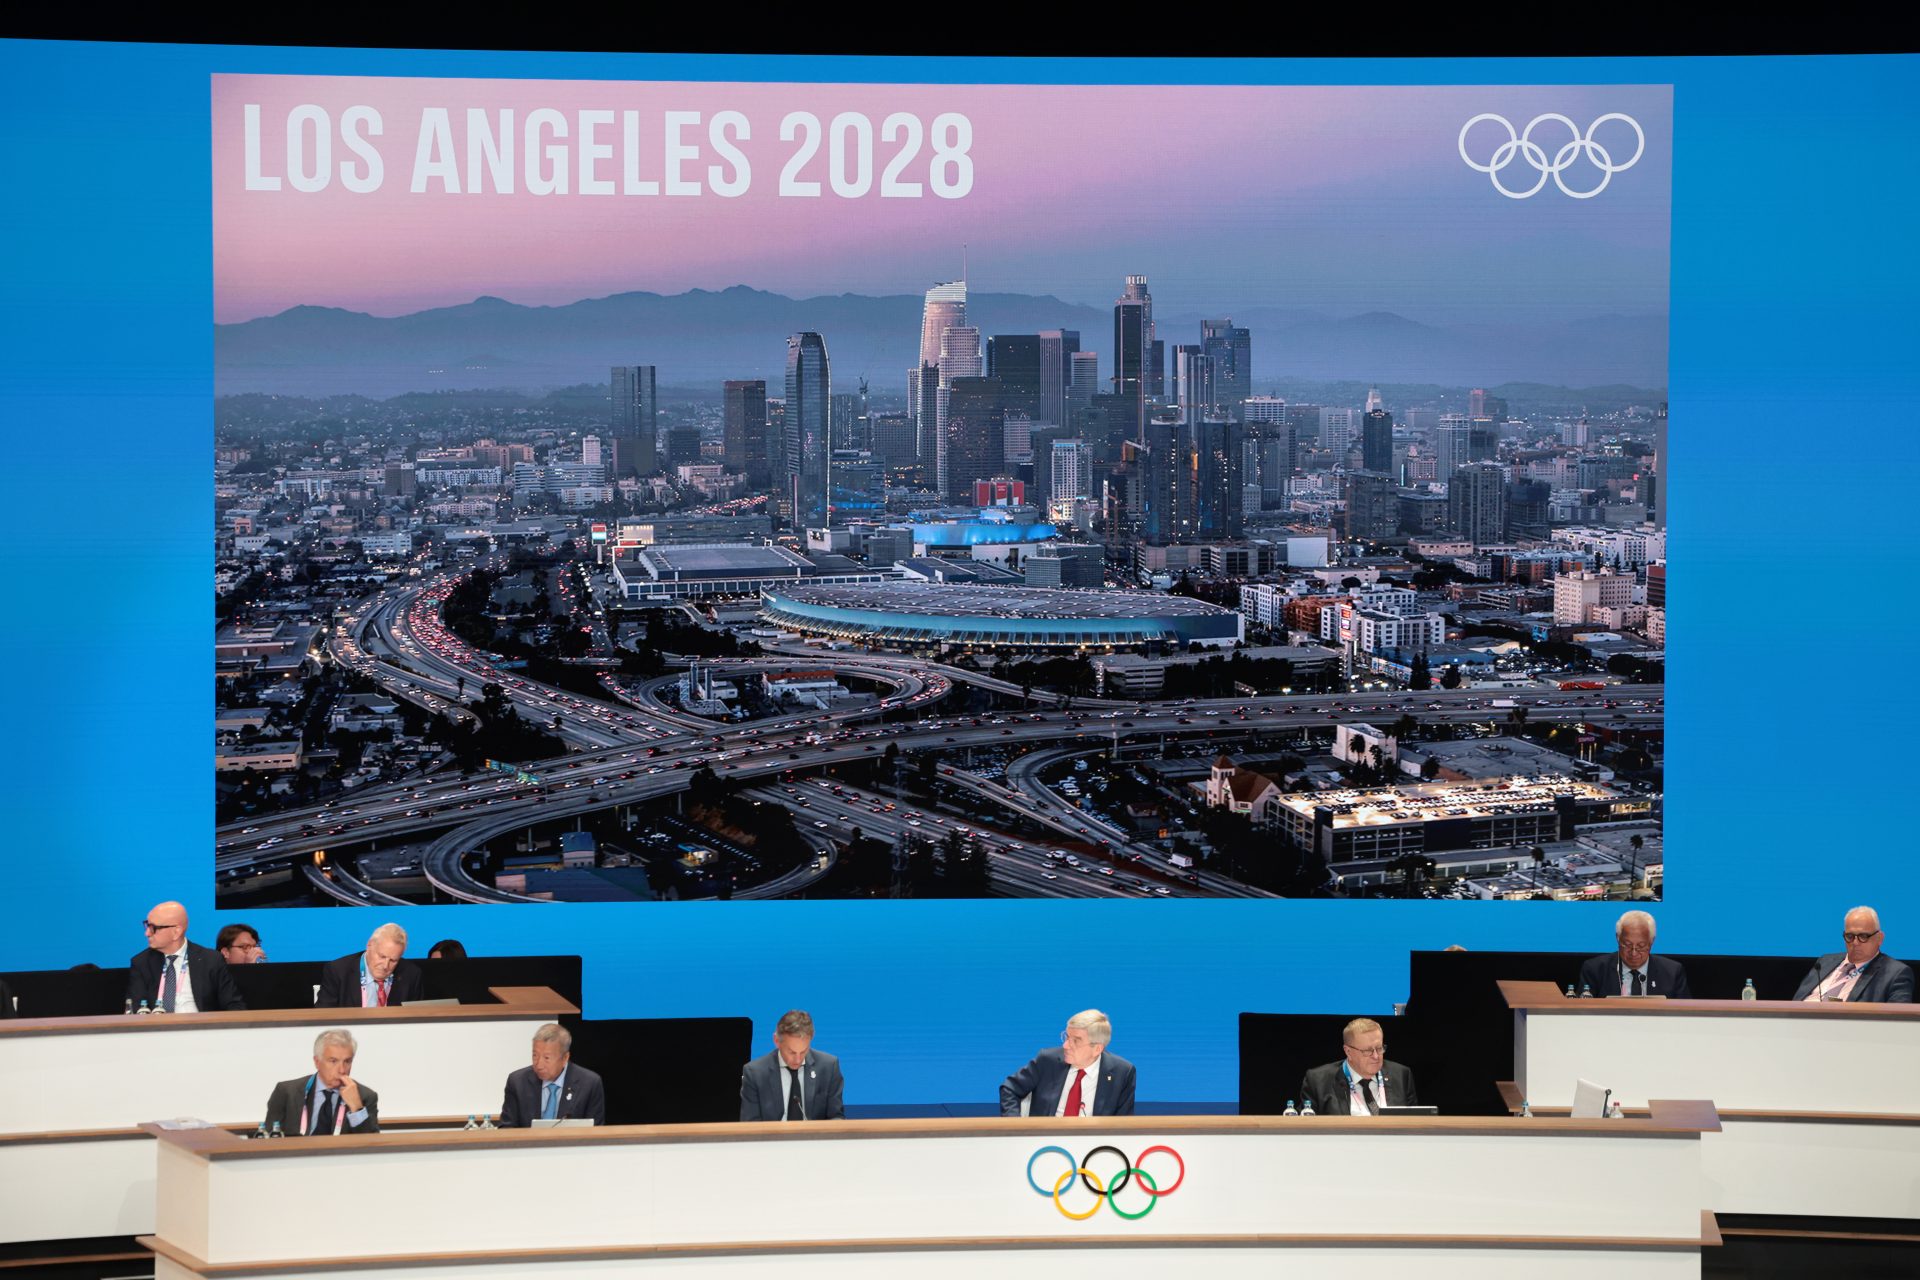 How the United States could lose the 2028 Olympics